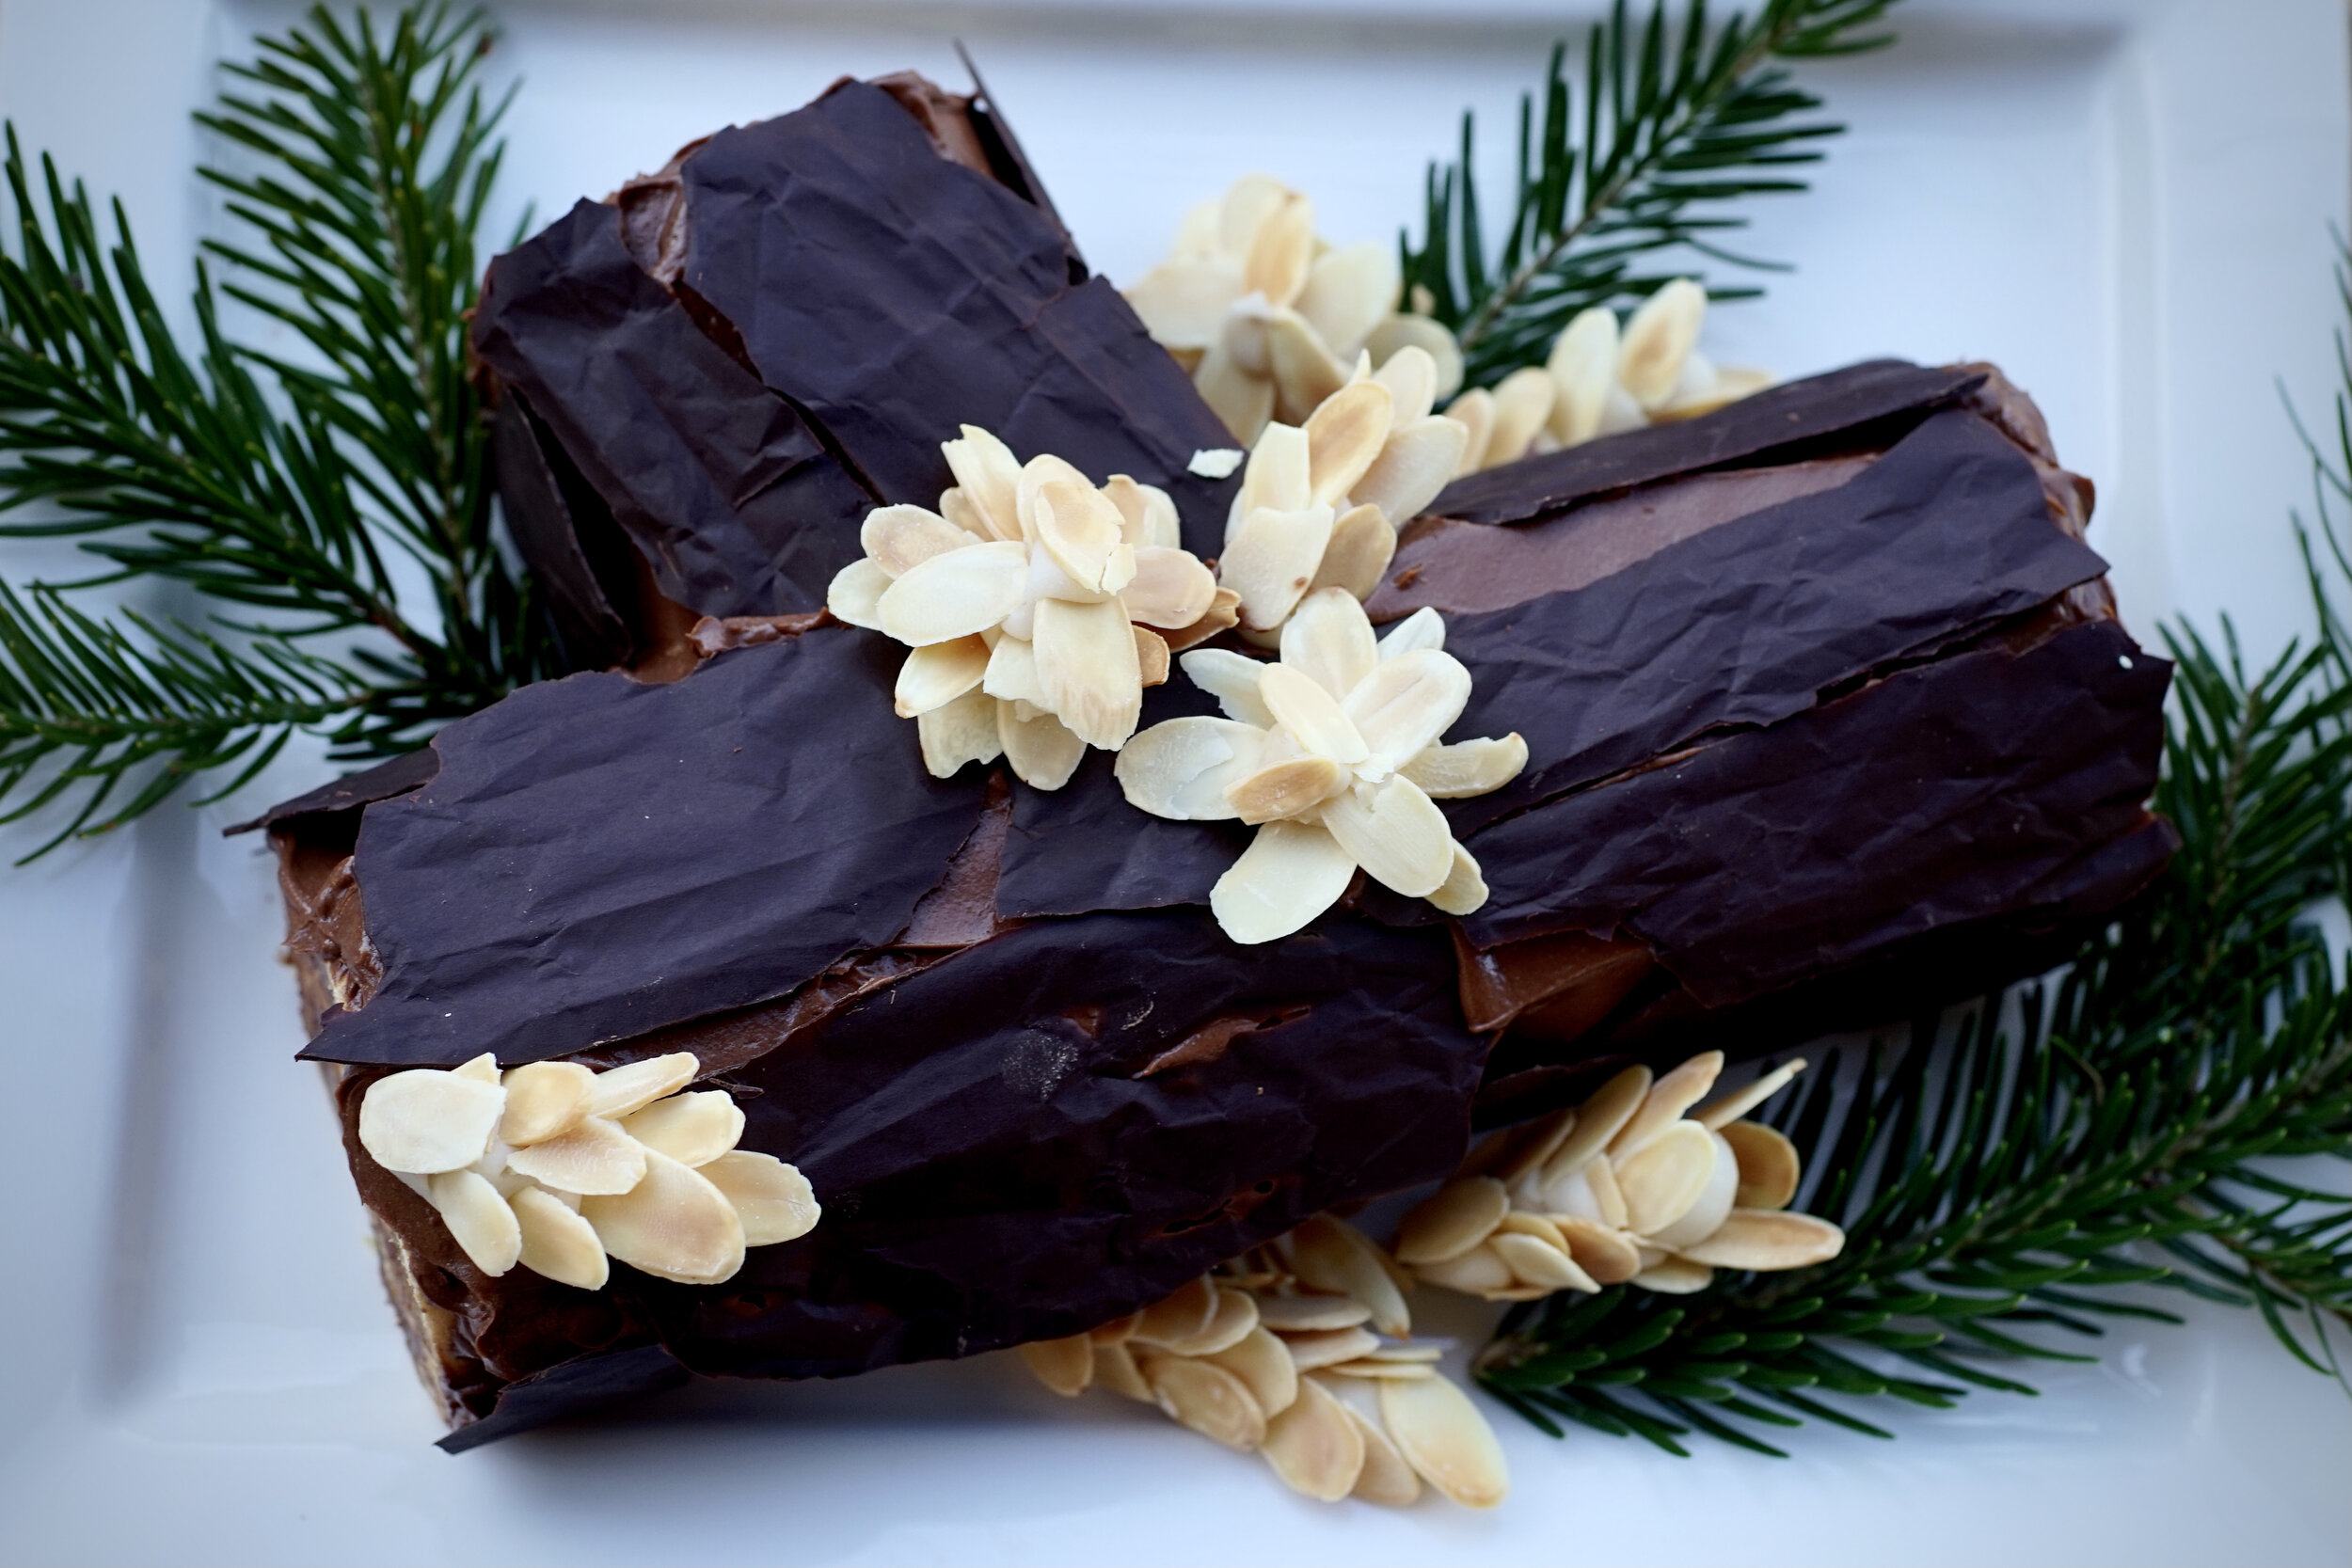 🎄 This Buche de Noel monochromic and reminiscent of the Swiss